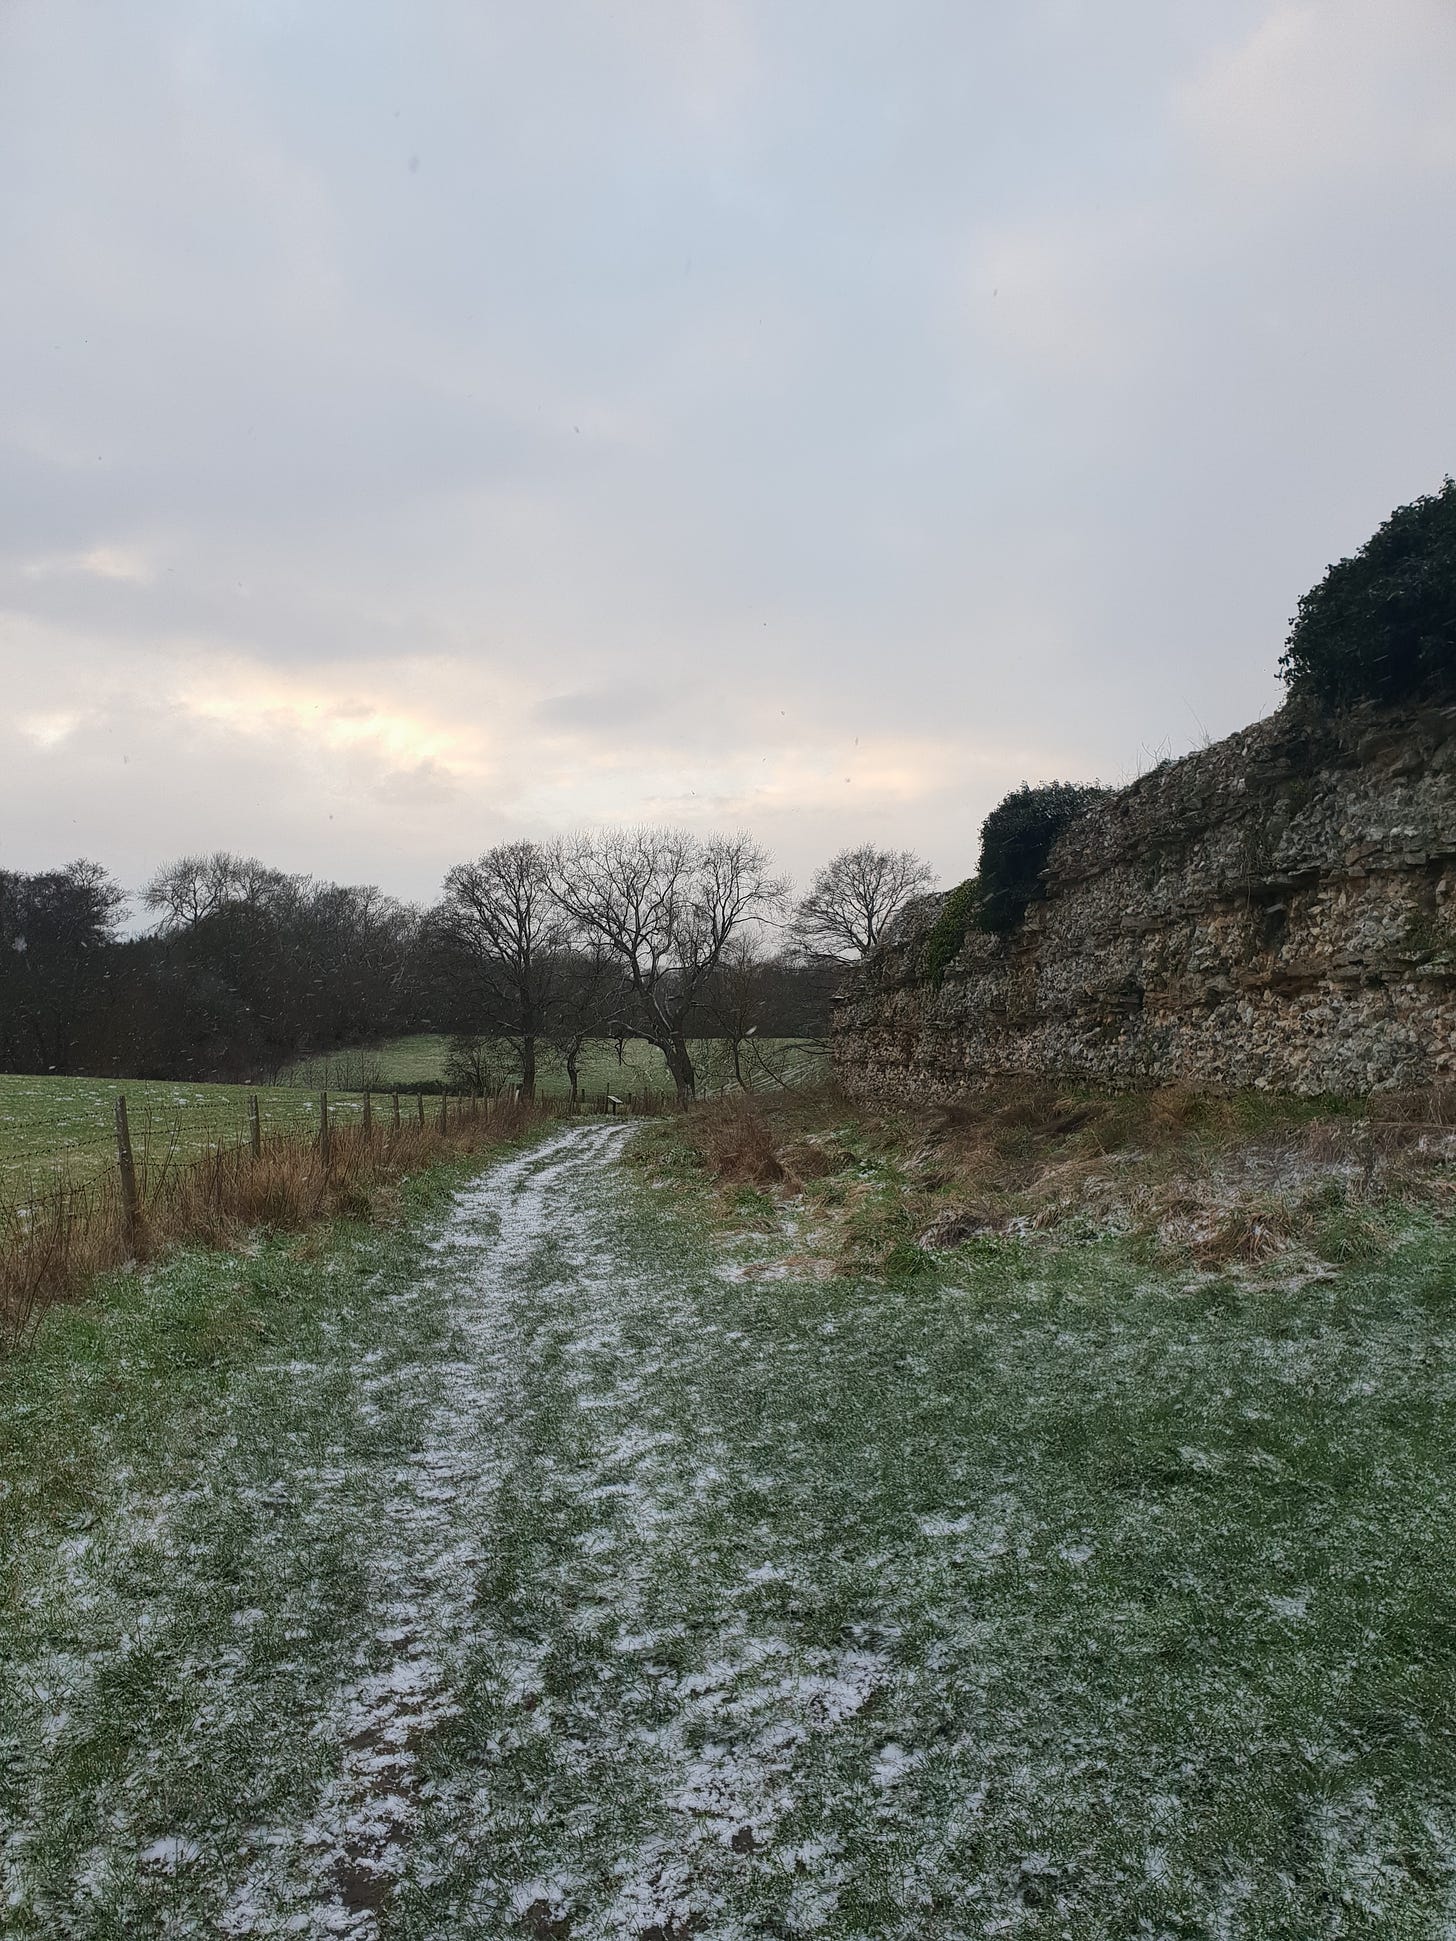 Snow-covered grass track running alongside a tall, stone Roman wall